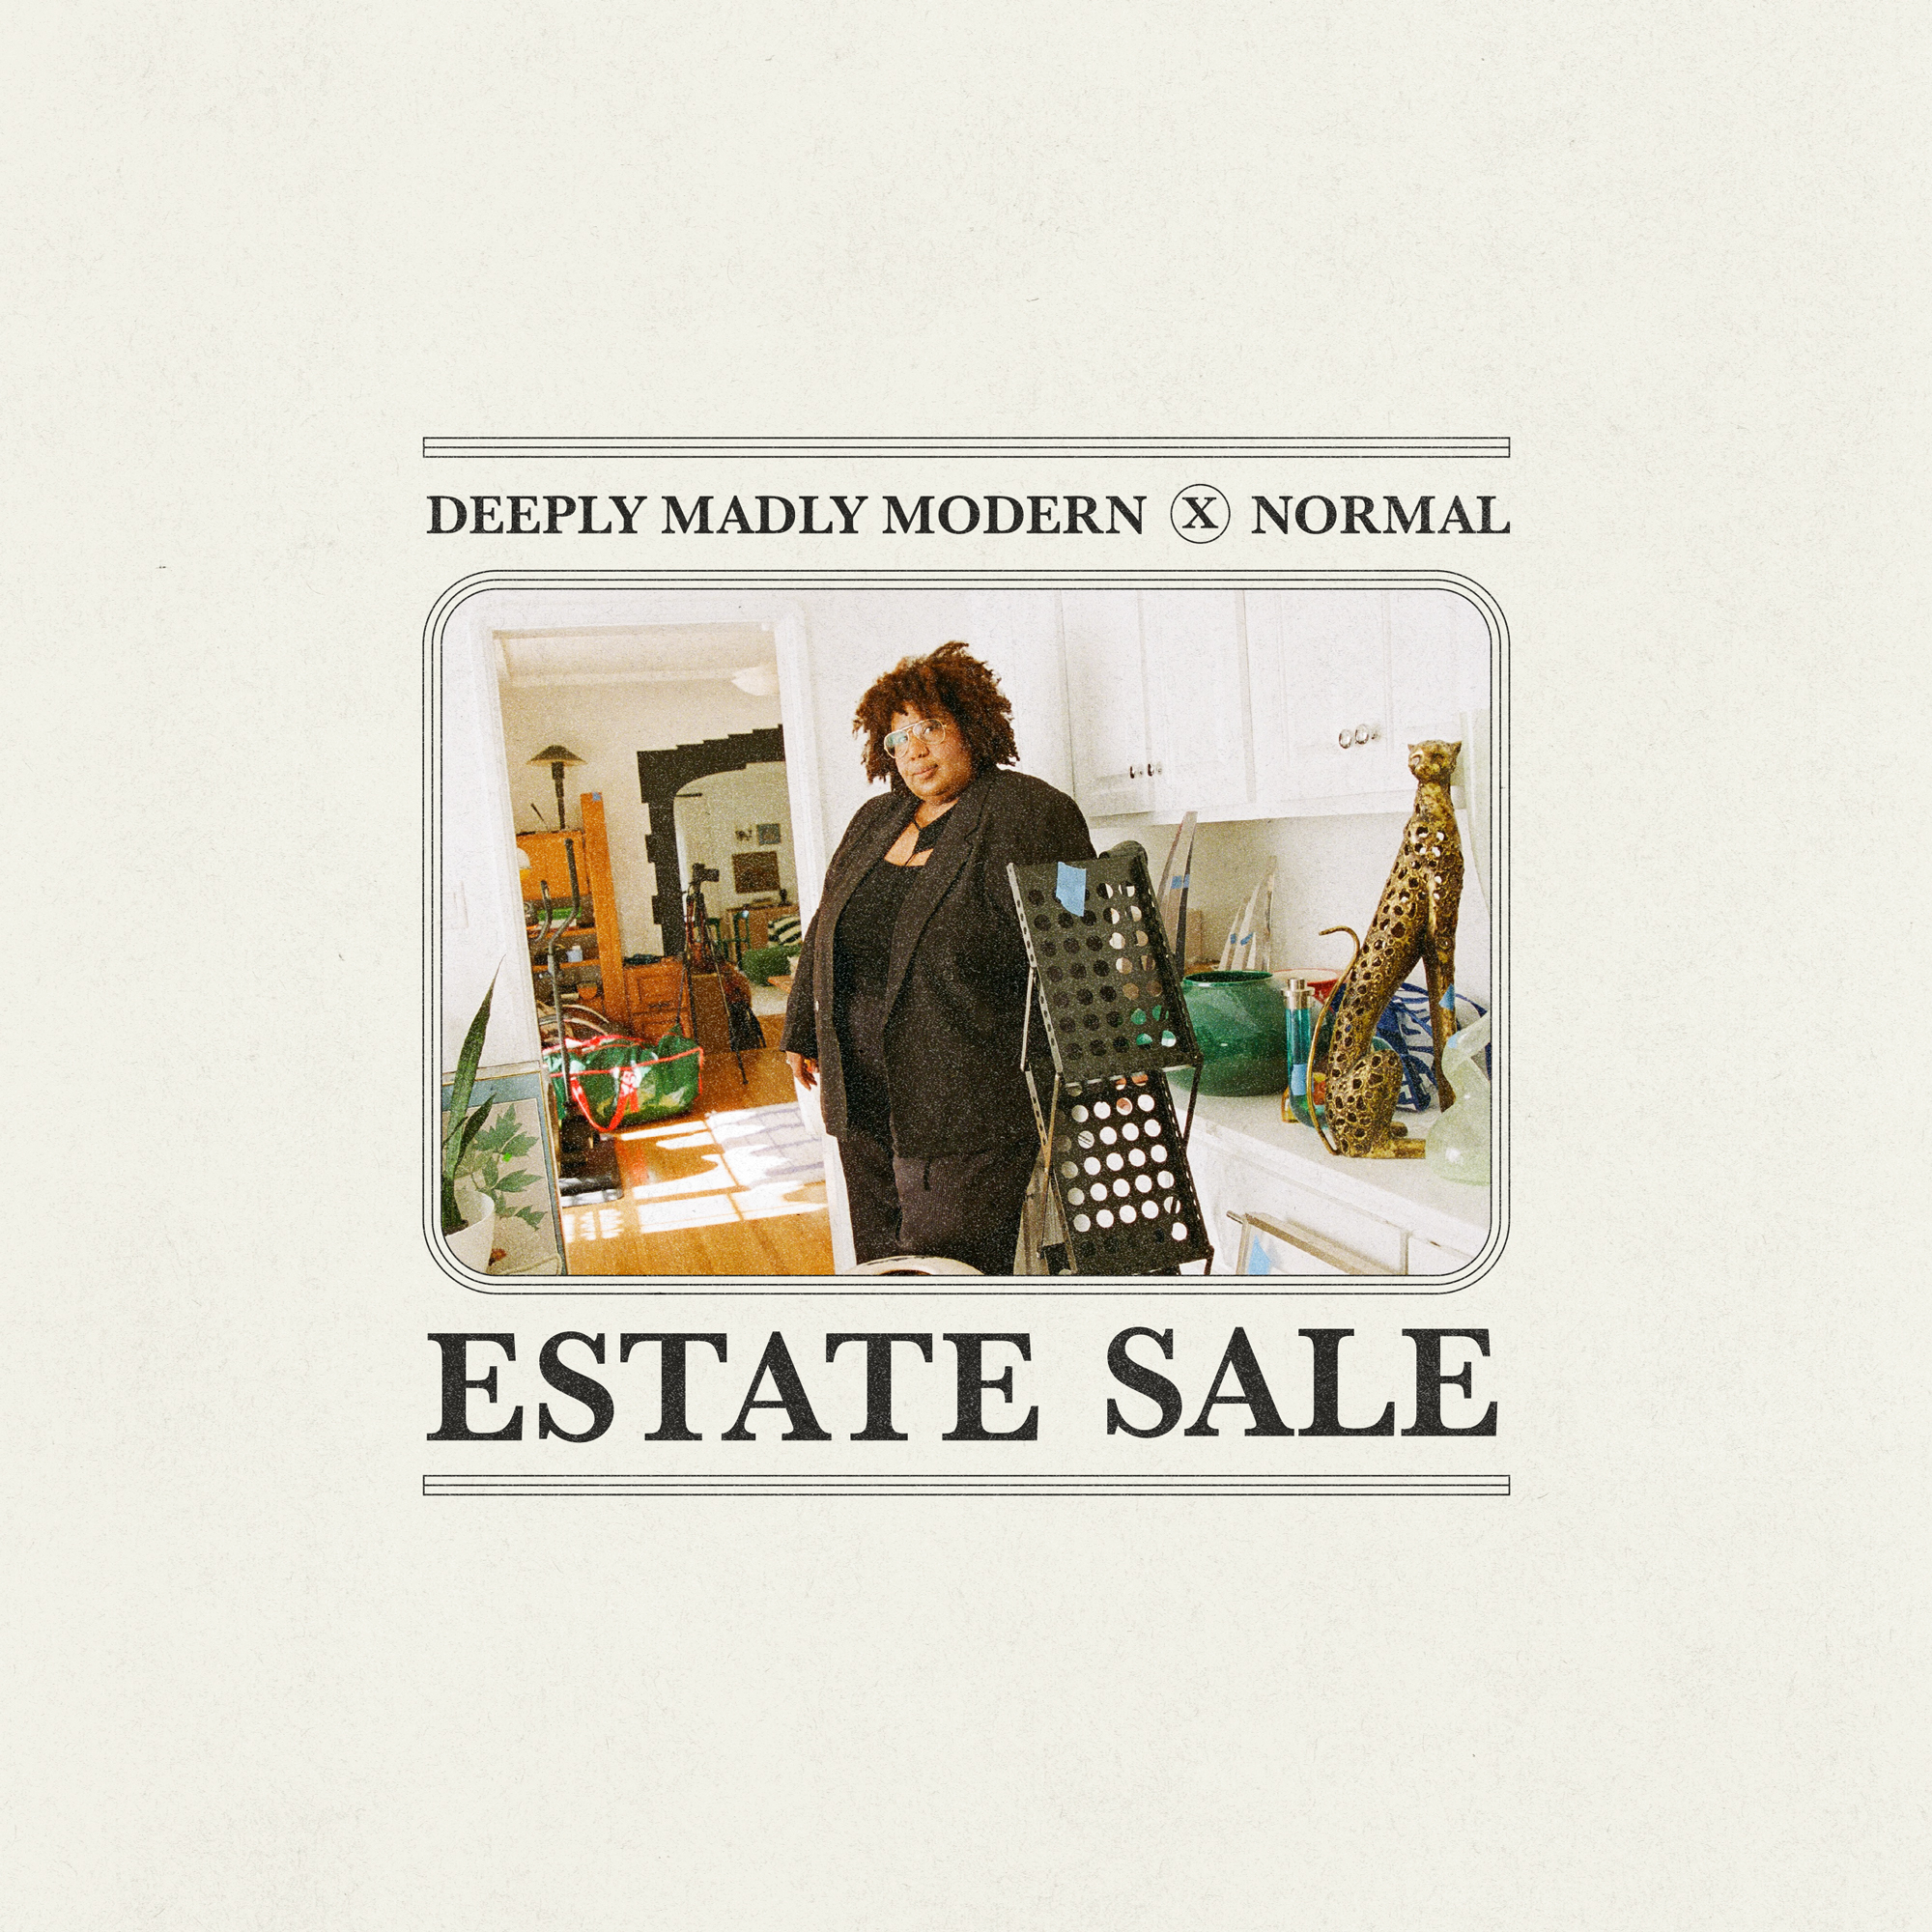 The "ESTATE SALE" poster features text and a lady's photo for an intriguing promotion.